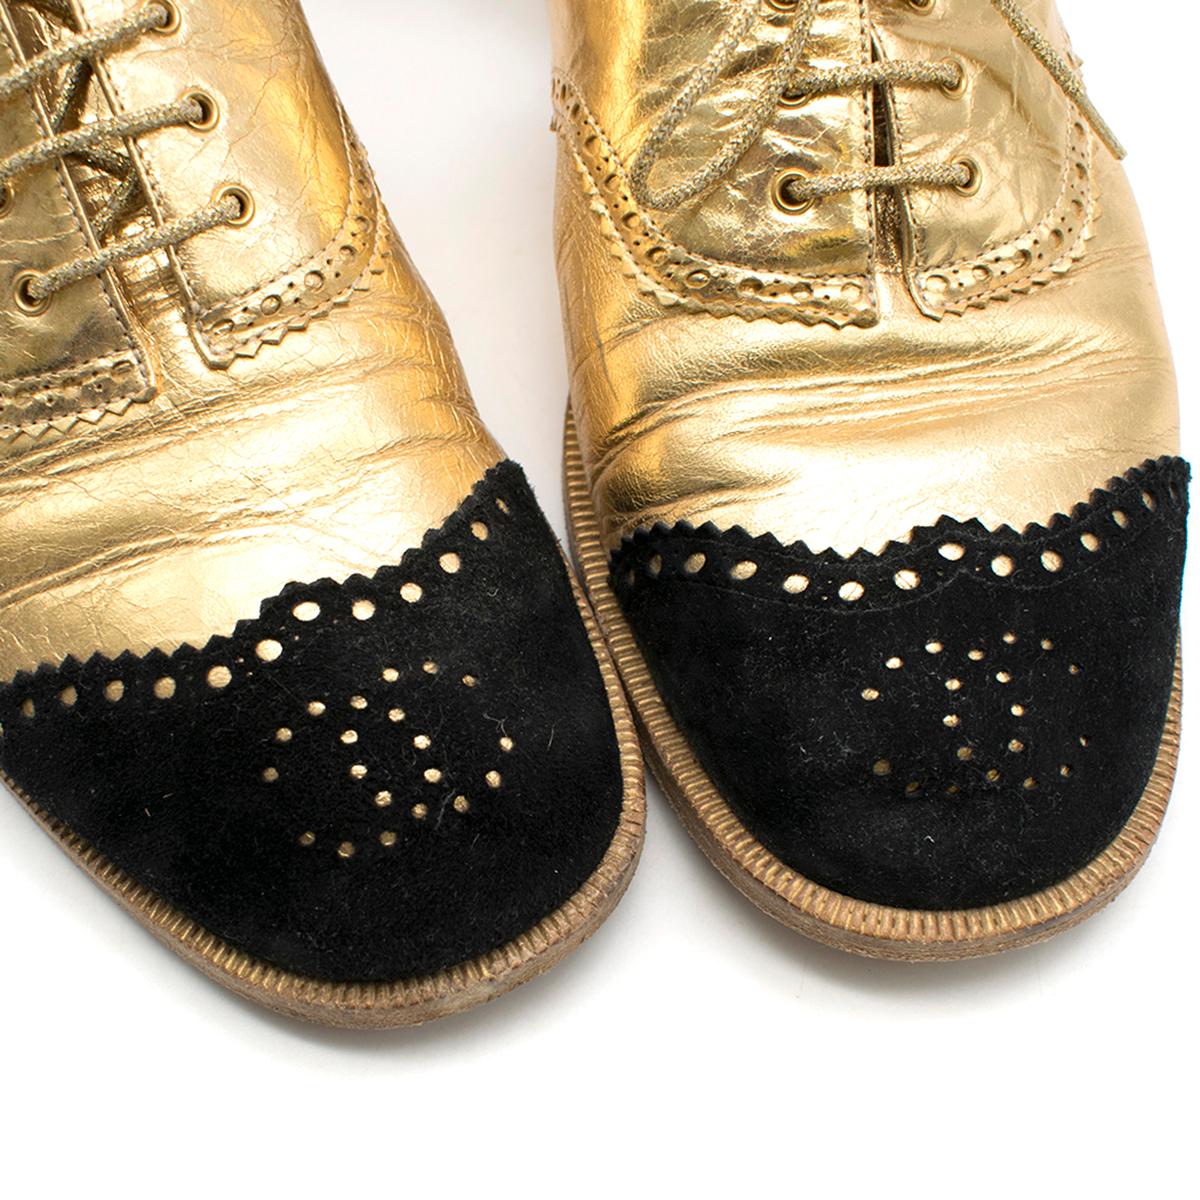 Chanel cut-out gold leather brogue sandals Size 39 1